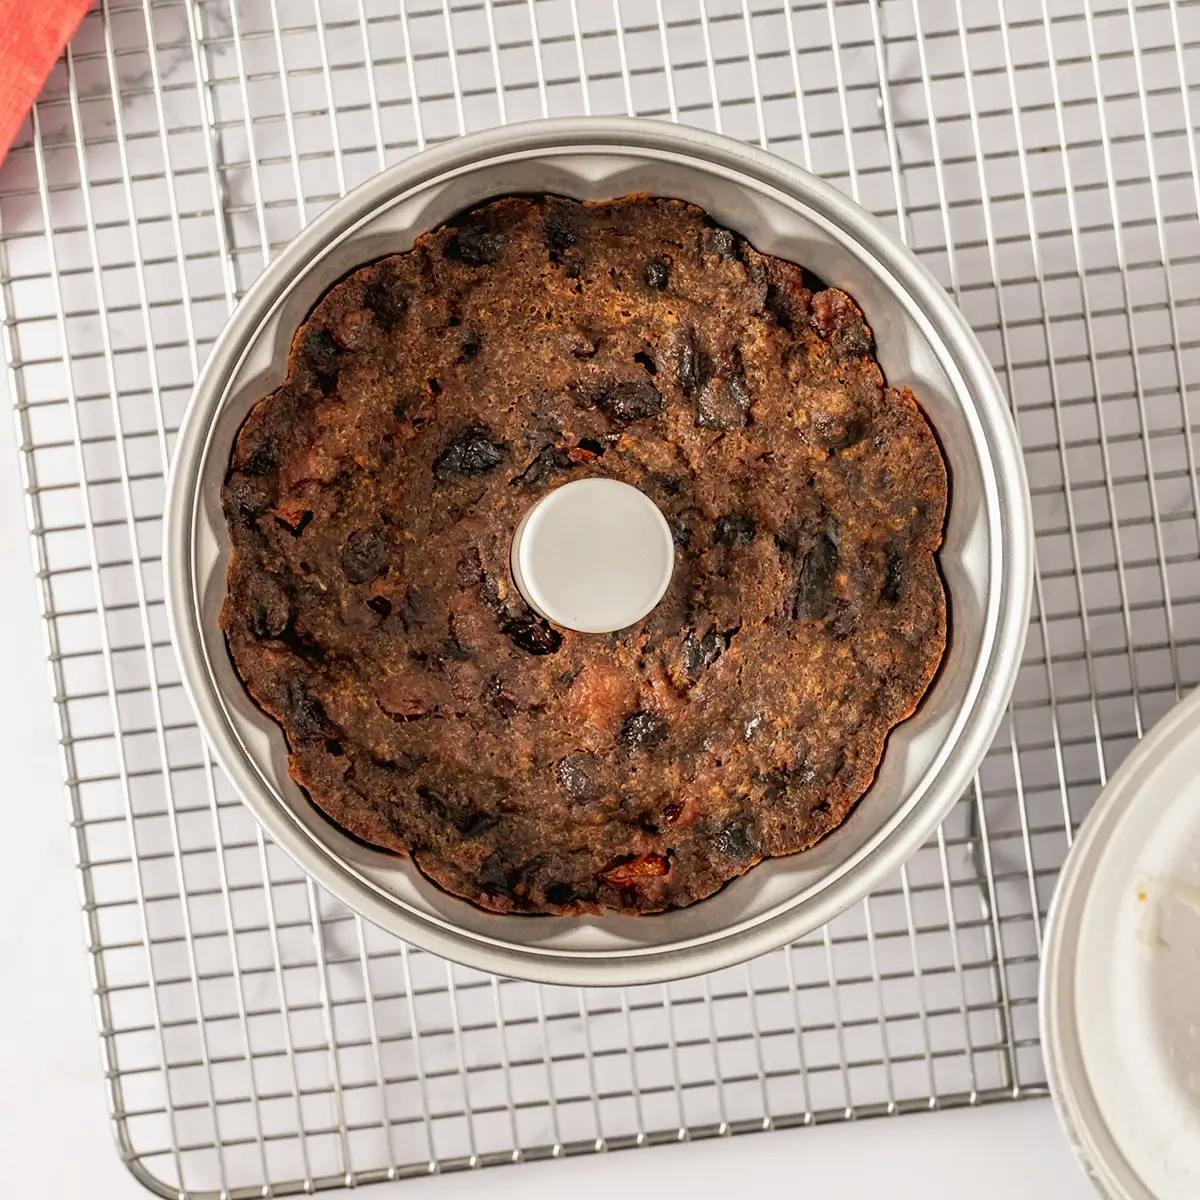 A Christmas Plum Pudding cooling on a rack.